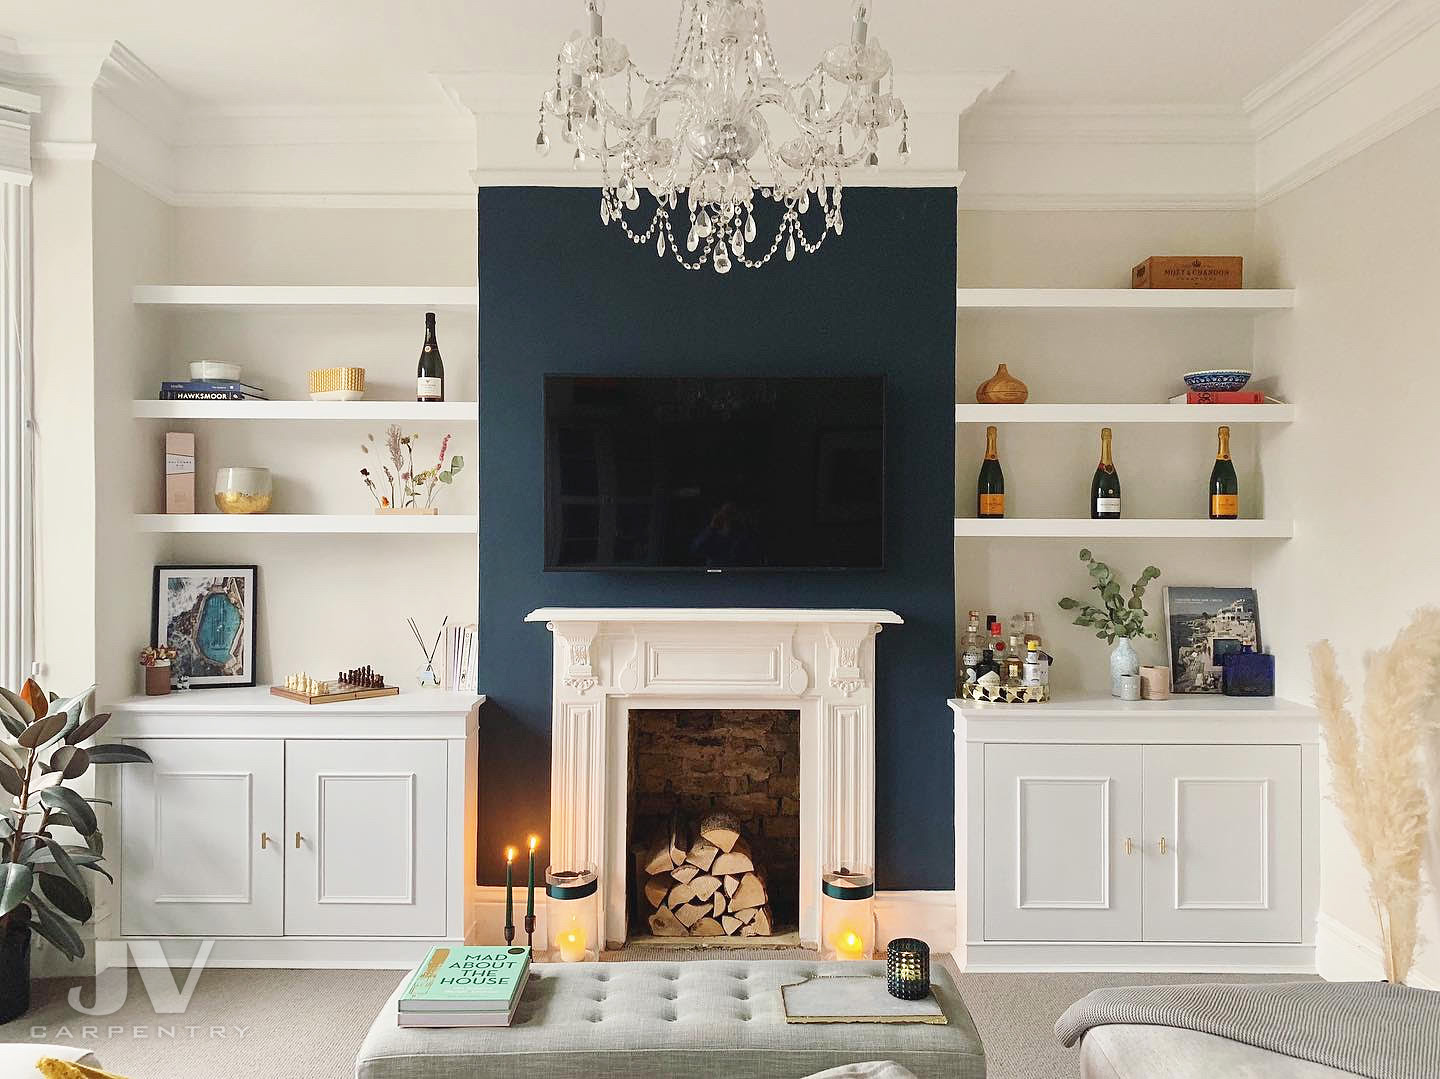 23 Alcove Shelving Ideas For Your, Floating Wood Shelves Beside Fireplace